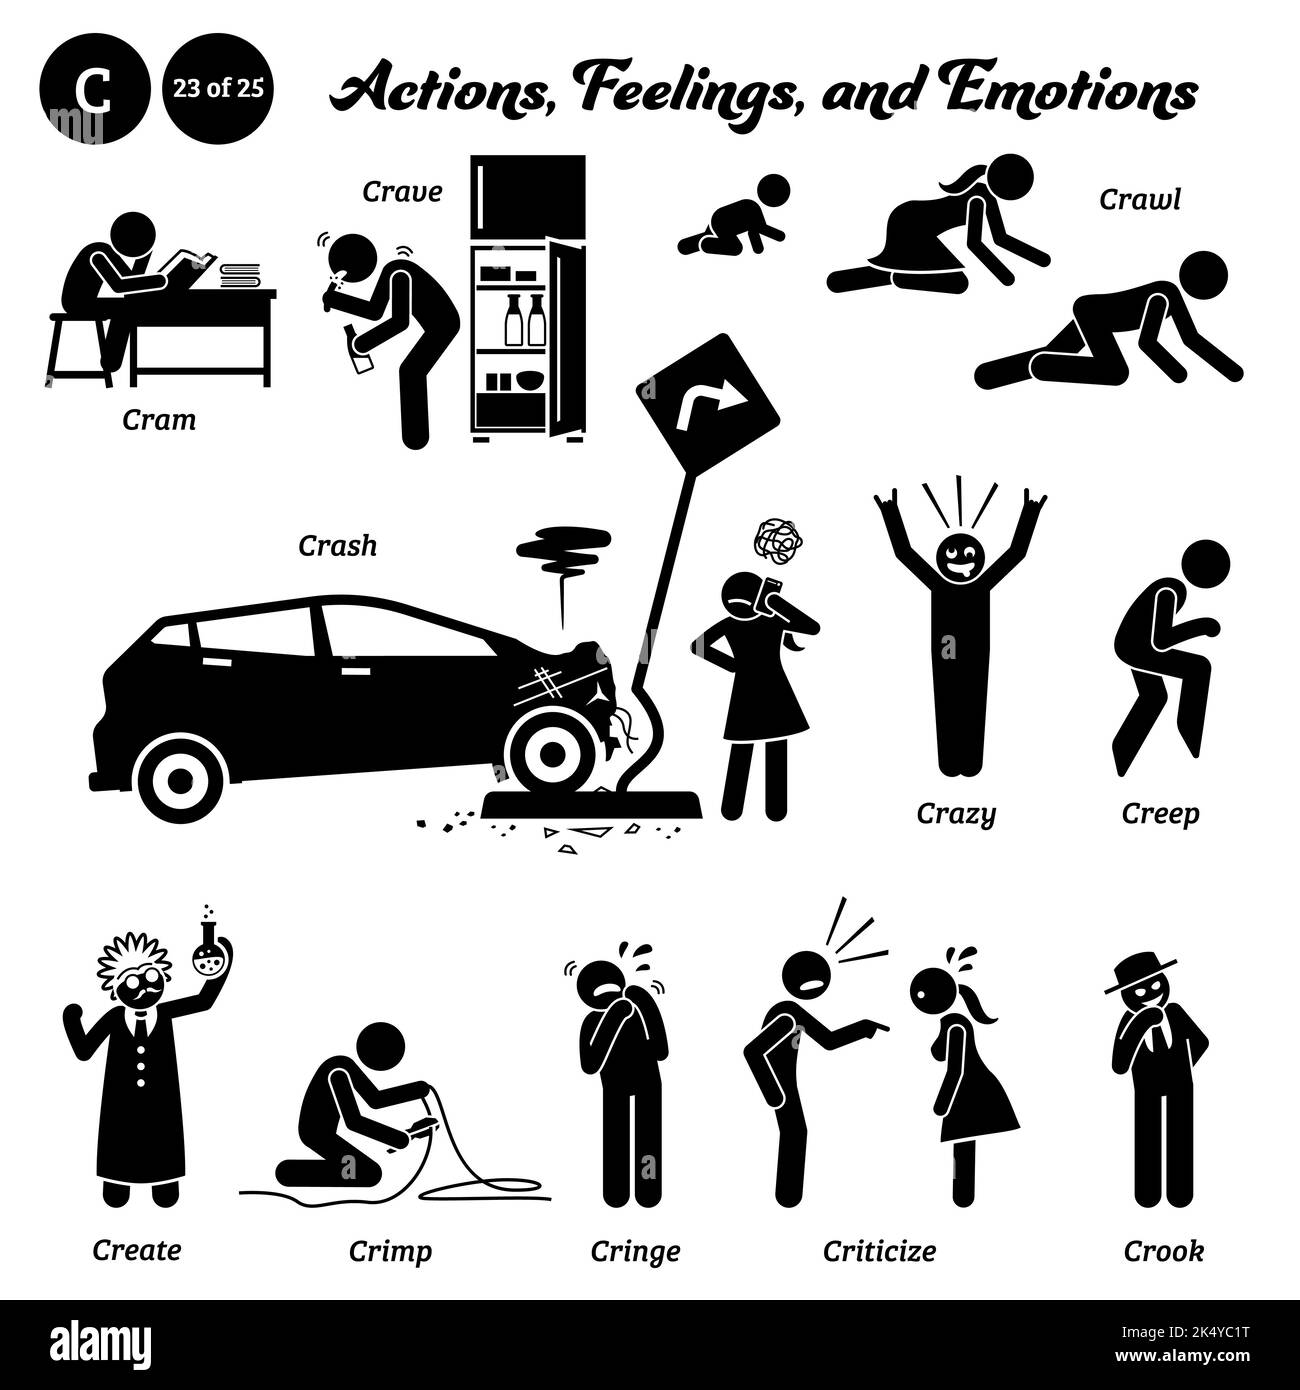 Stick figure human people man action, feelings, and emotions icons starting with alphabet C. Cram, crave, crawl, crash, crazy, creep, create, crimp, c Stock Vector